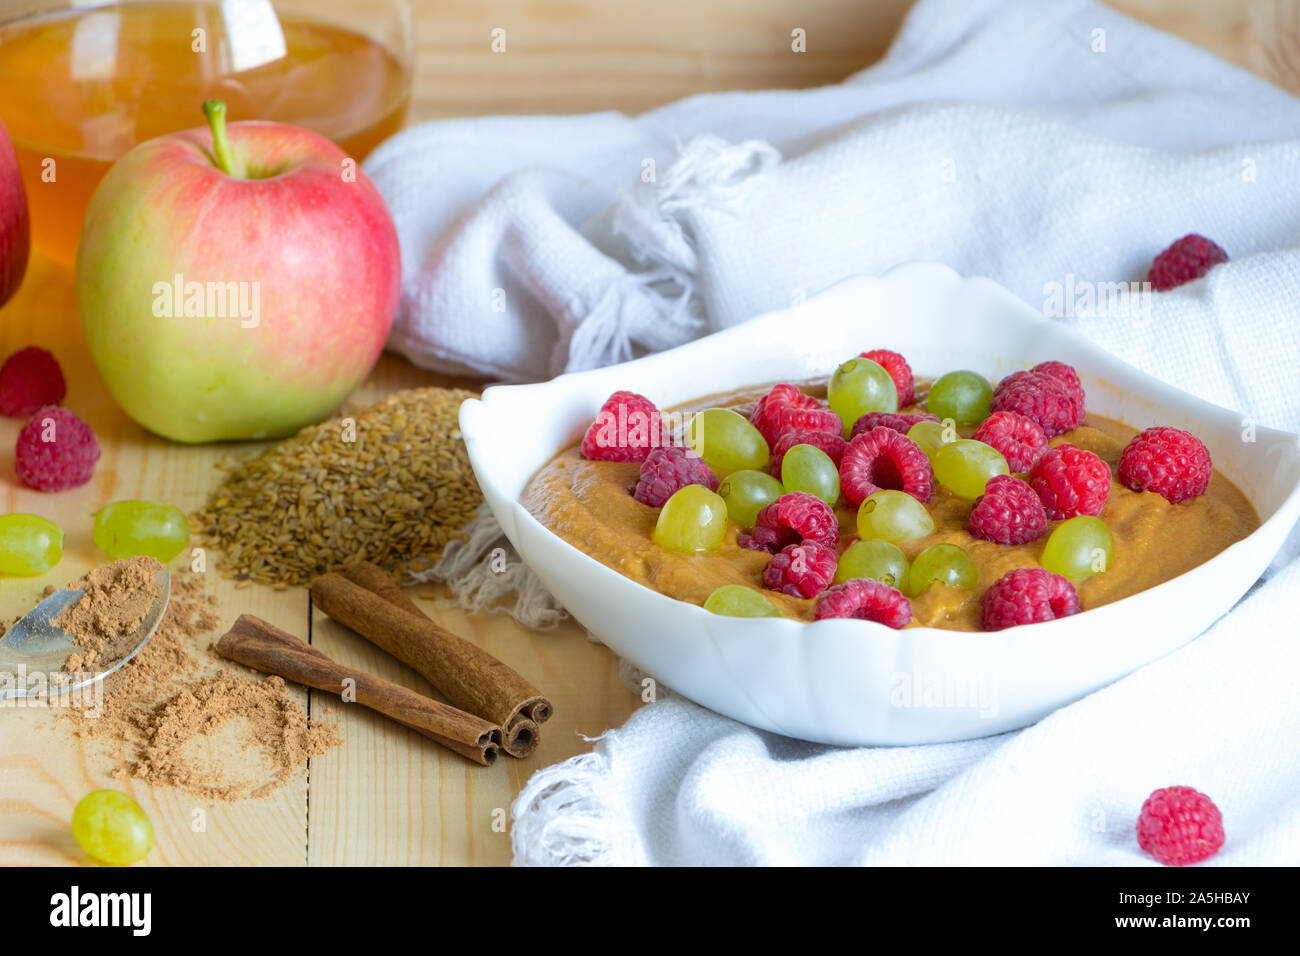 Healthy meal concept background. Vegan flax porridge with raspberry and grape raisins in white bowl on fabric. Apple, honey, cinnamon sticks and Stock Photo